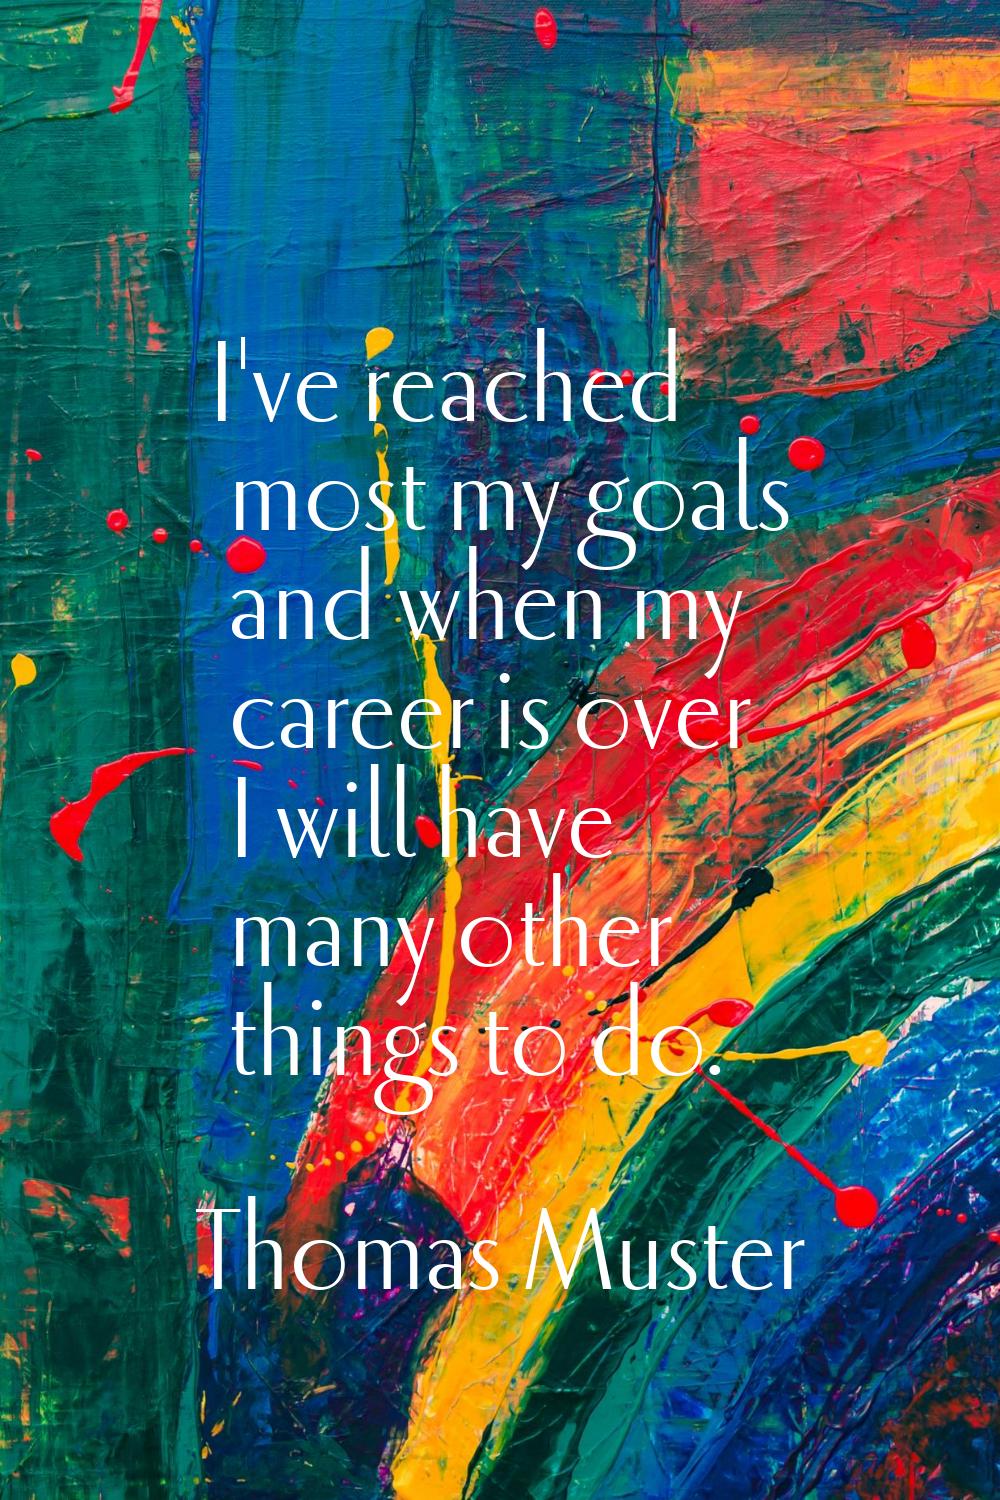 I've reached most my goals and when my career is over I will have many other things to do.